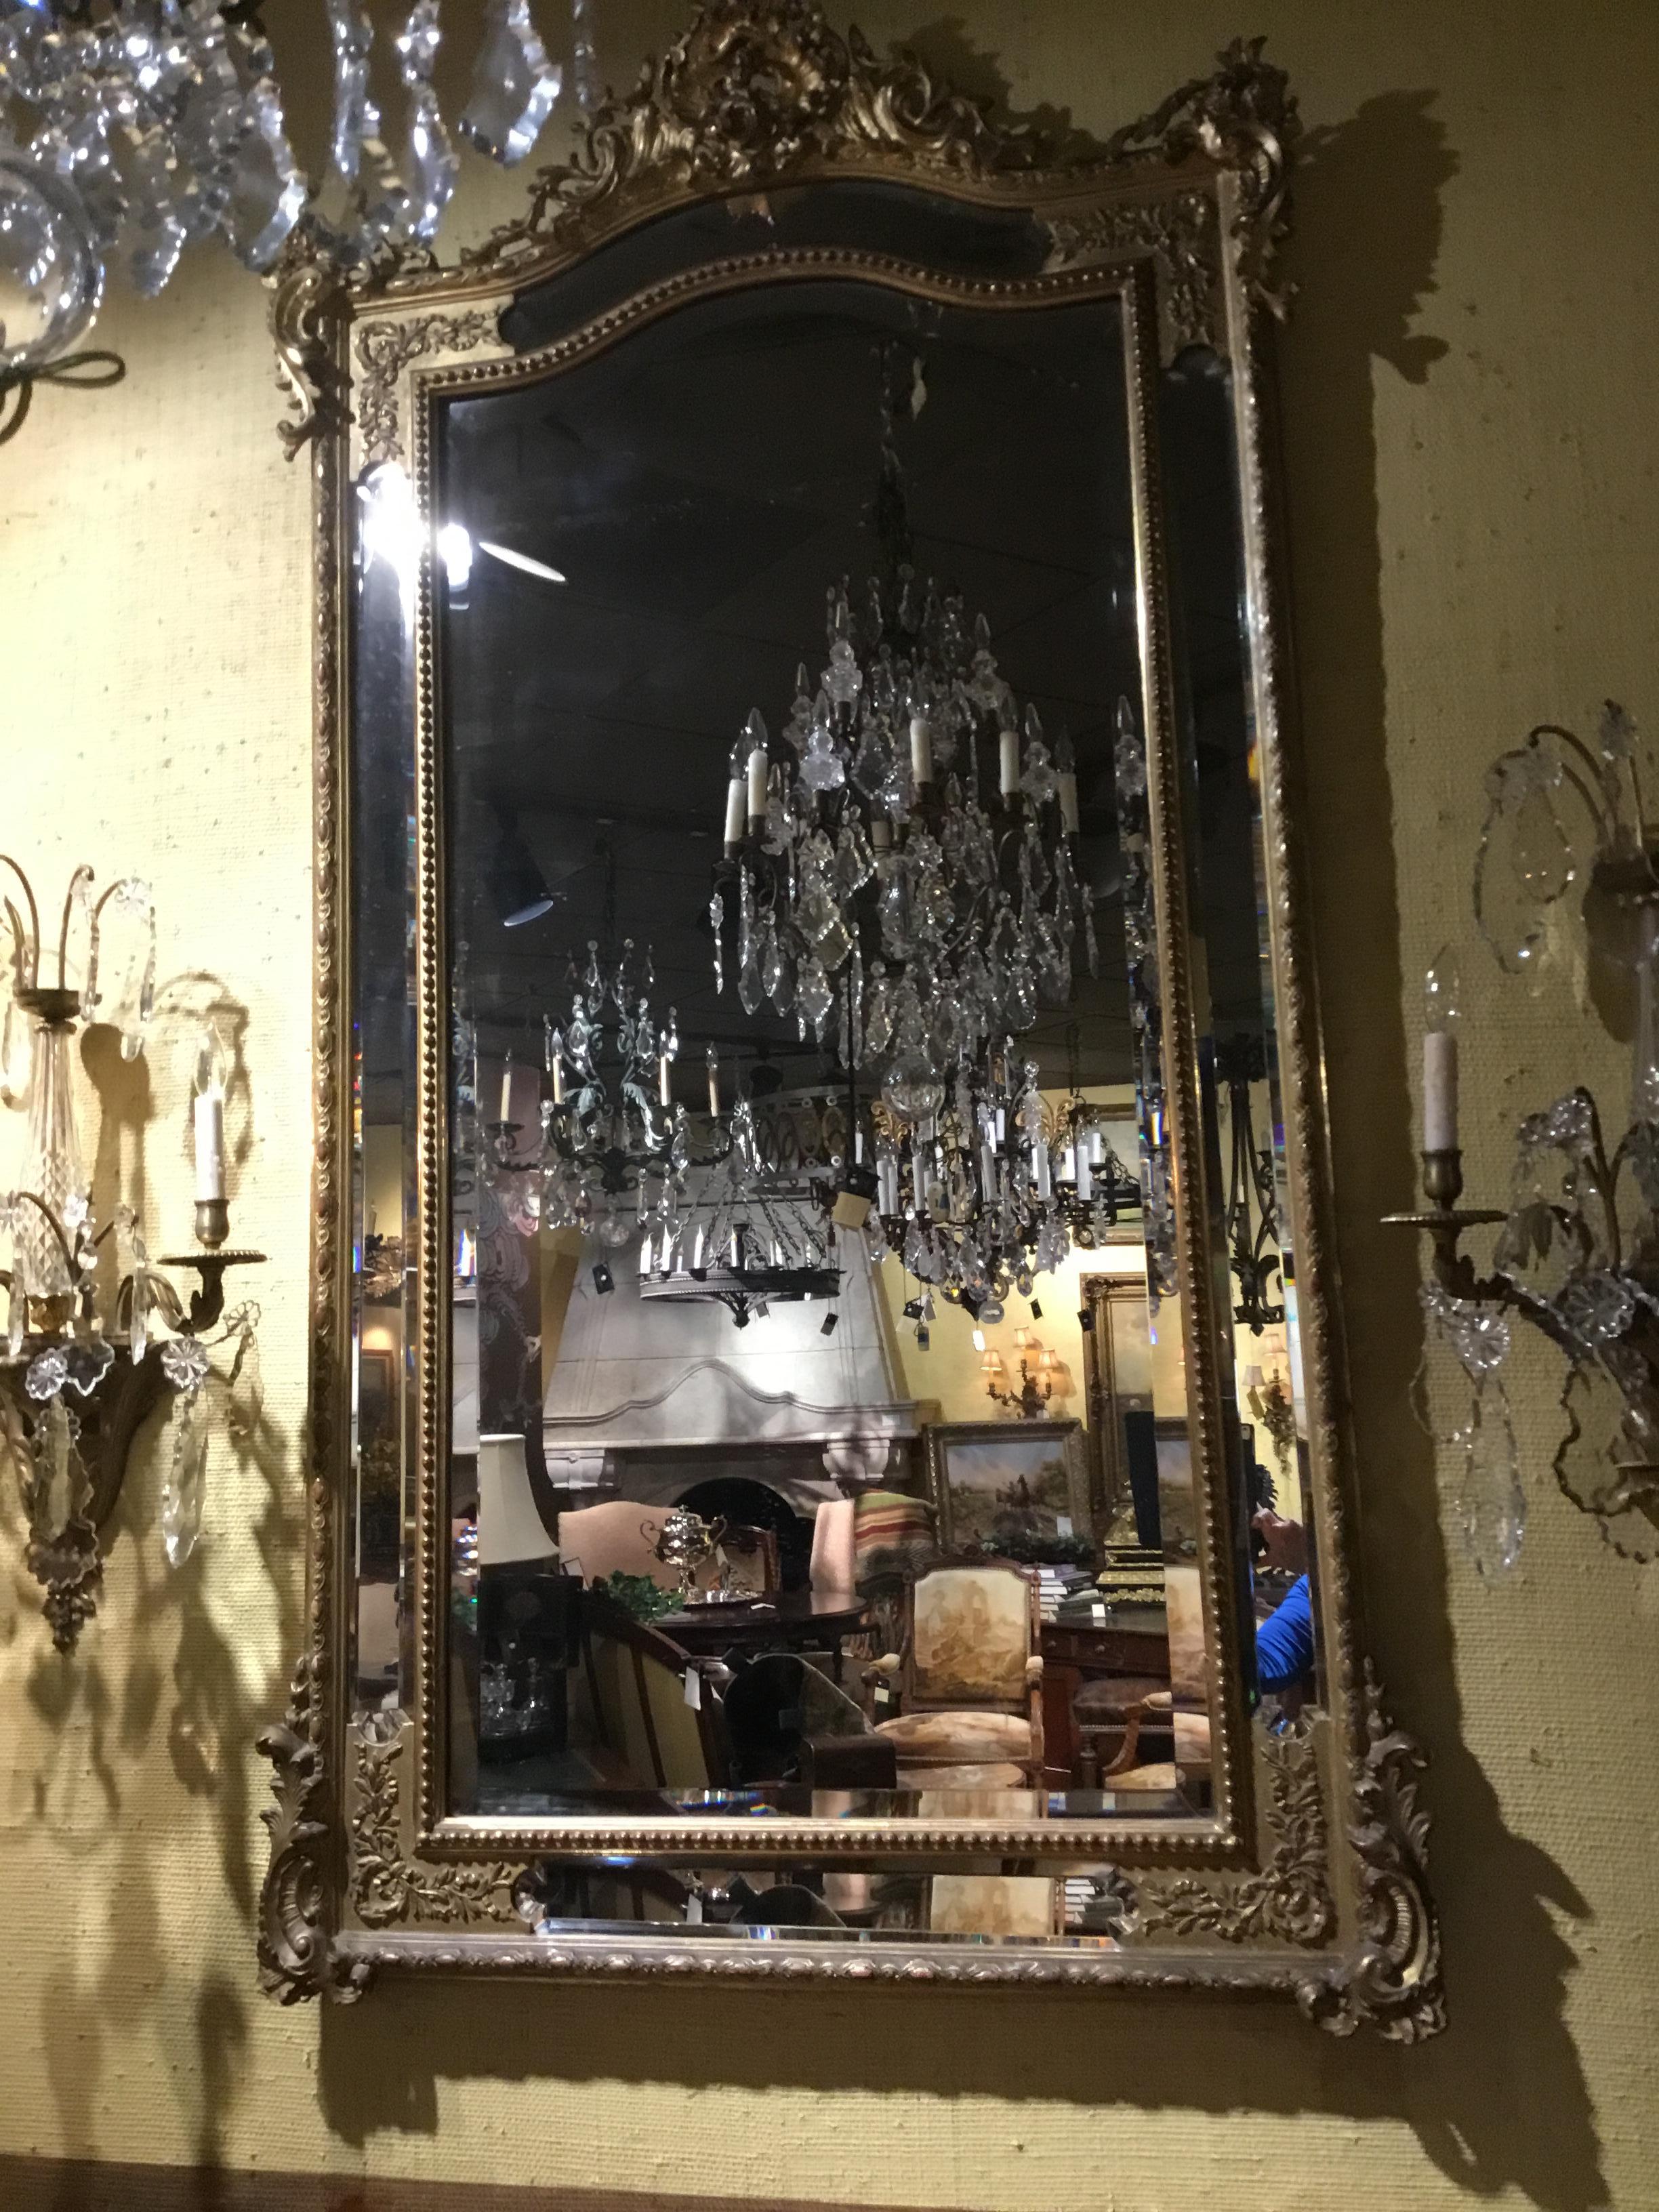 Exquisite double framed mirror with multiple bevels that give this piece
Exceptional spark. Original gilding with beautiful decorated corners and
A cortouche at the crest. Beading separates the mirrors on all sides.